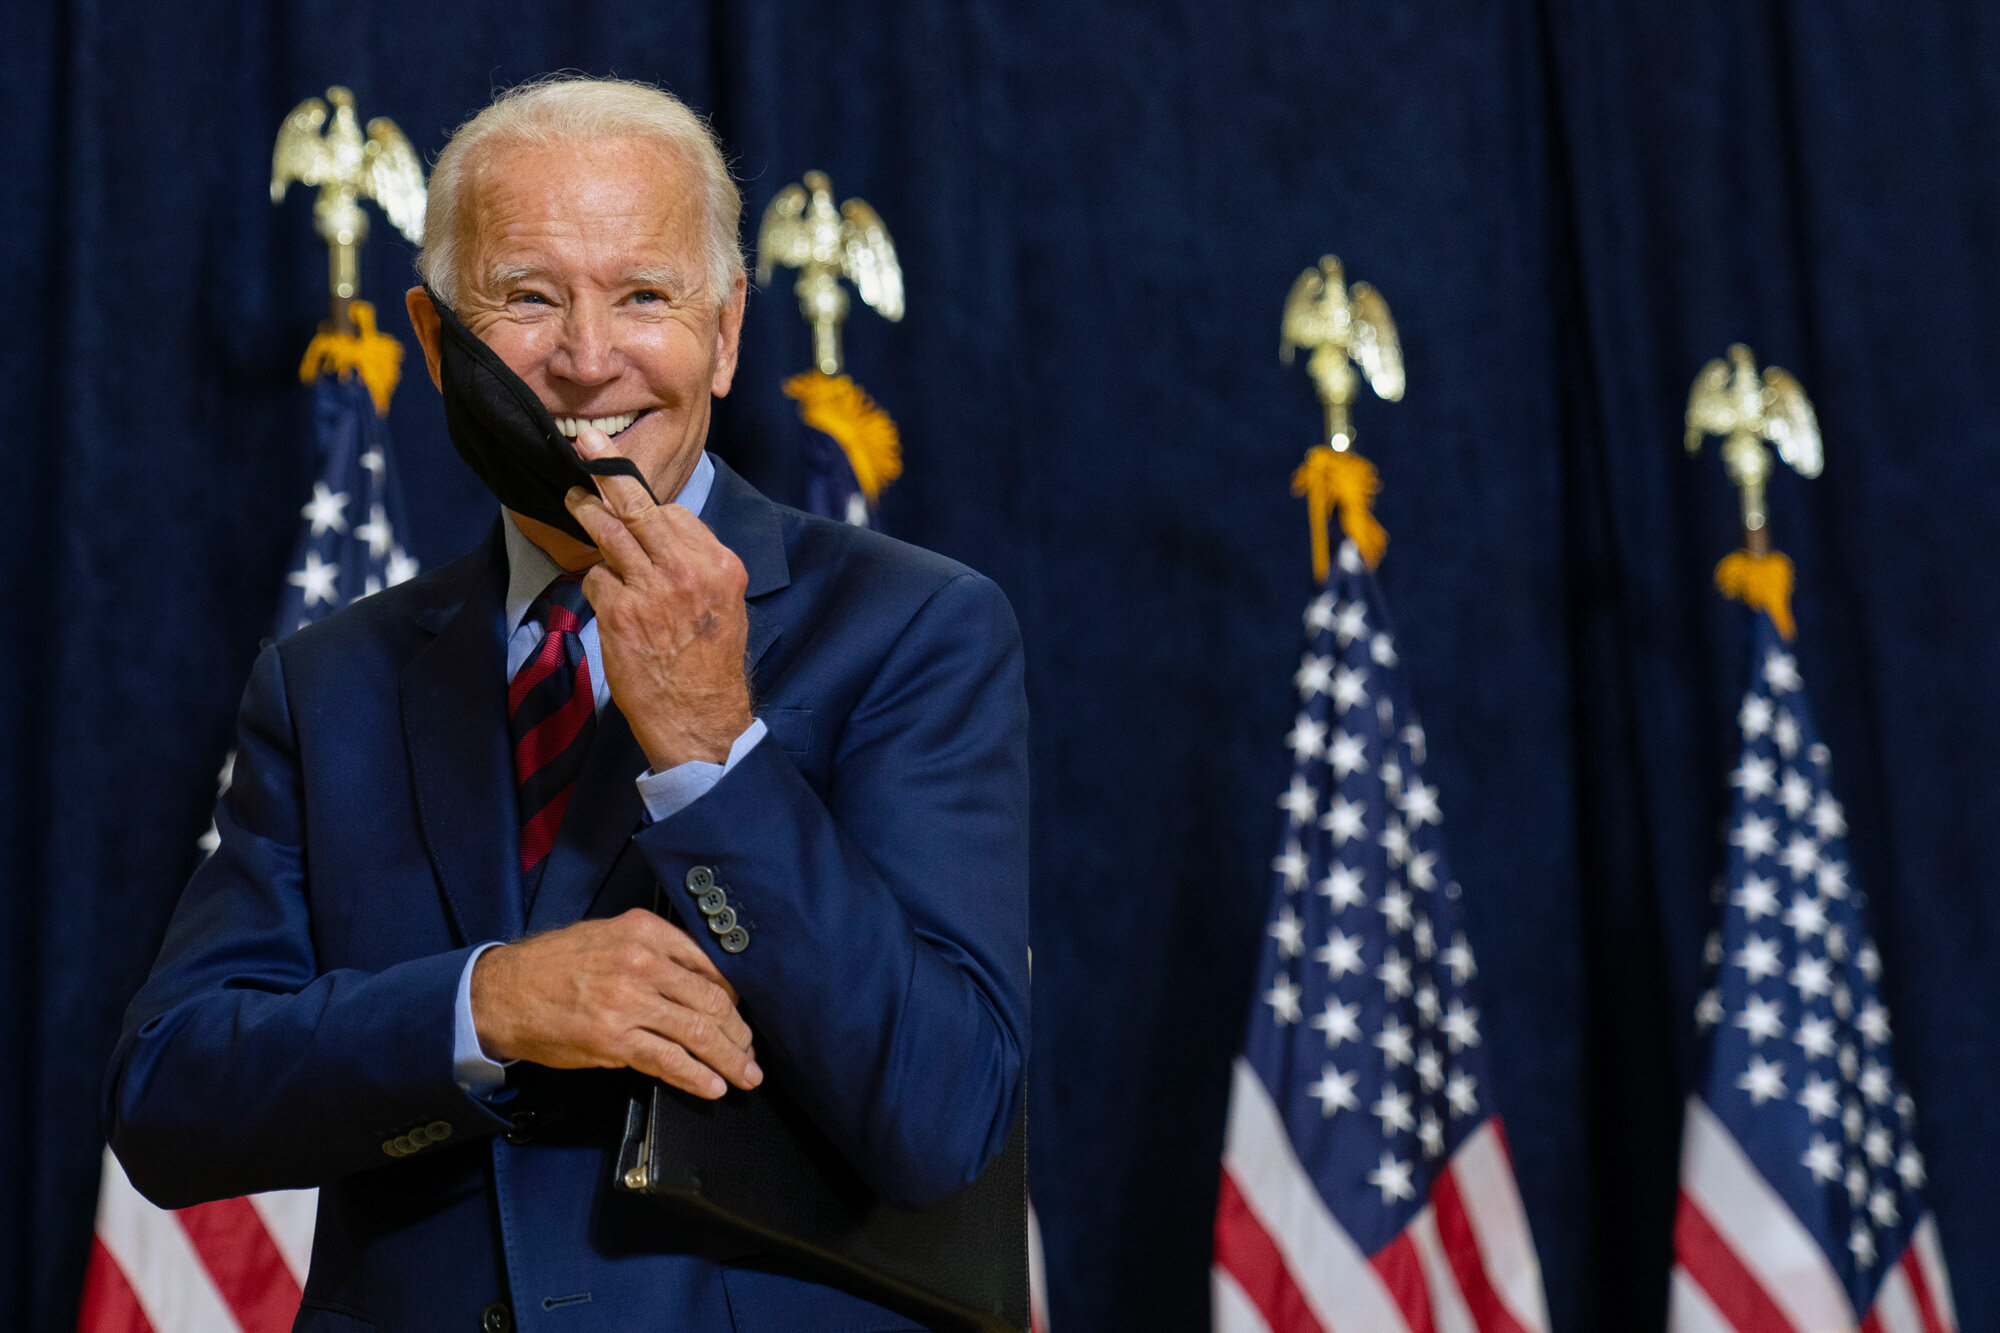  Democratic presidential candidate former Vice President Joe Biden smiles as he puts on his face mask after speaking to media in Wilmington, Del., on Sept. 4, 2020. (AP Photo/Carolyn Kaster) 